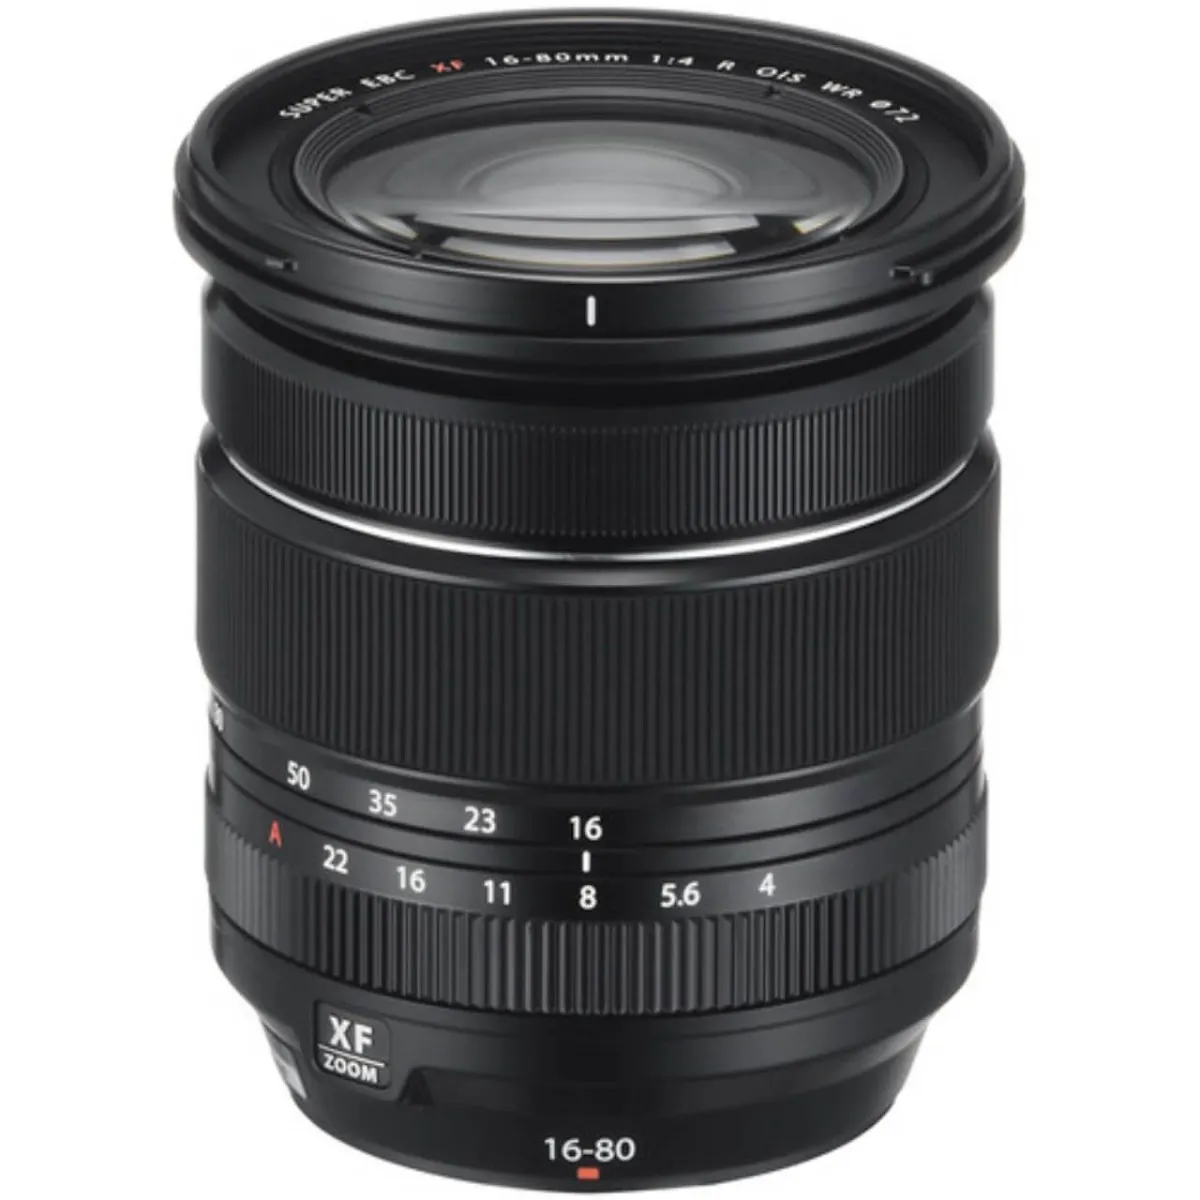 Image of Fujifilm XF 16-80mmF4 R OIS WR Weather Resistant